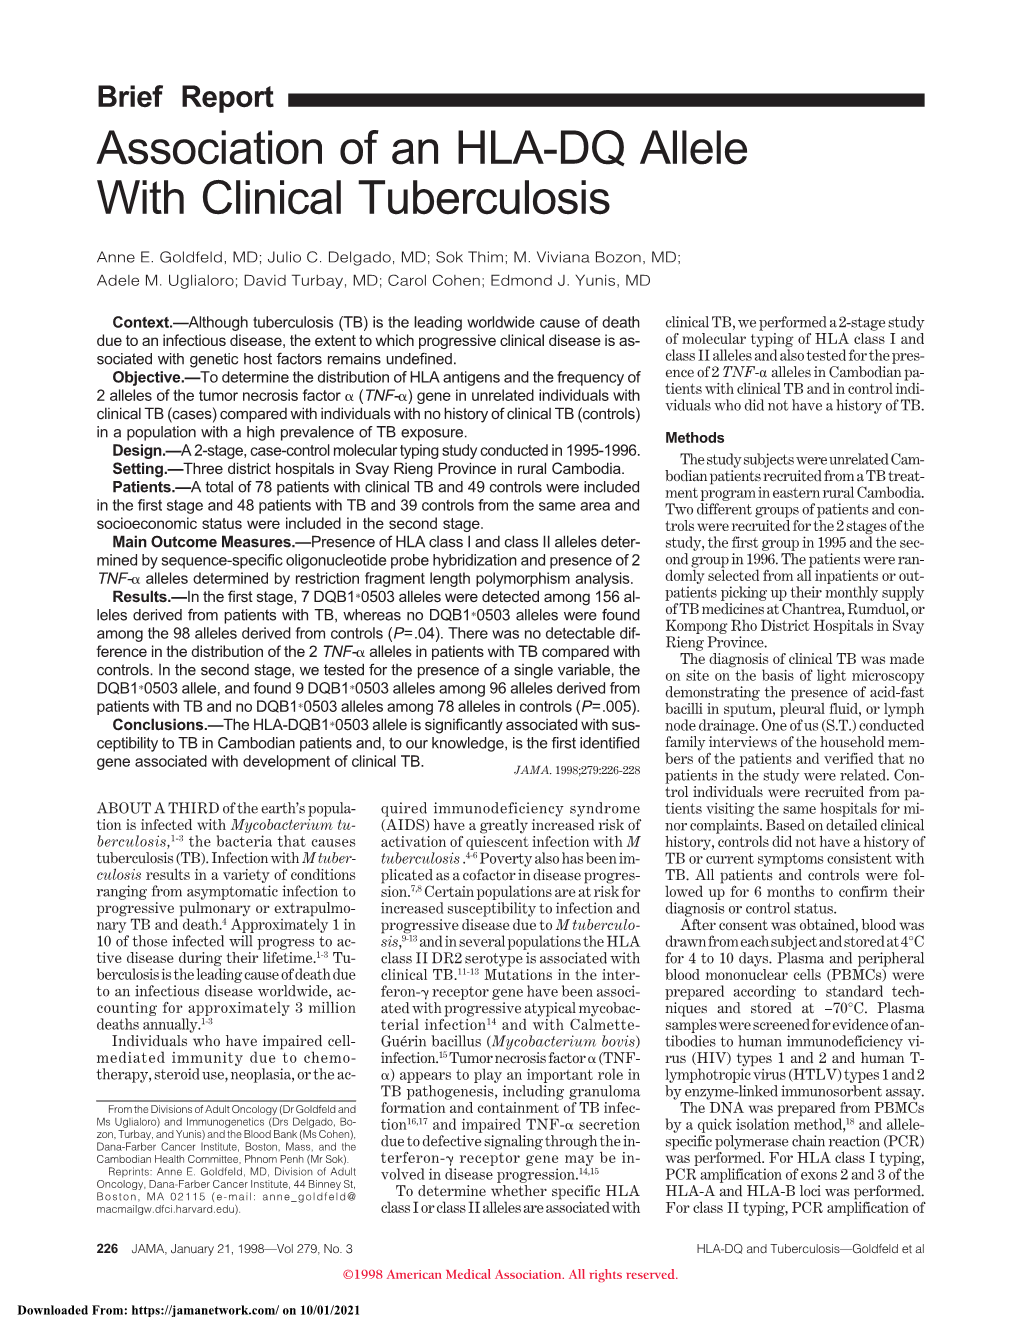 Association of an HLA-DQ Allele with Clinical Tuberculosis